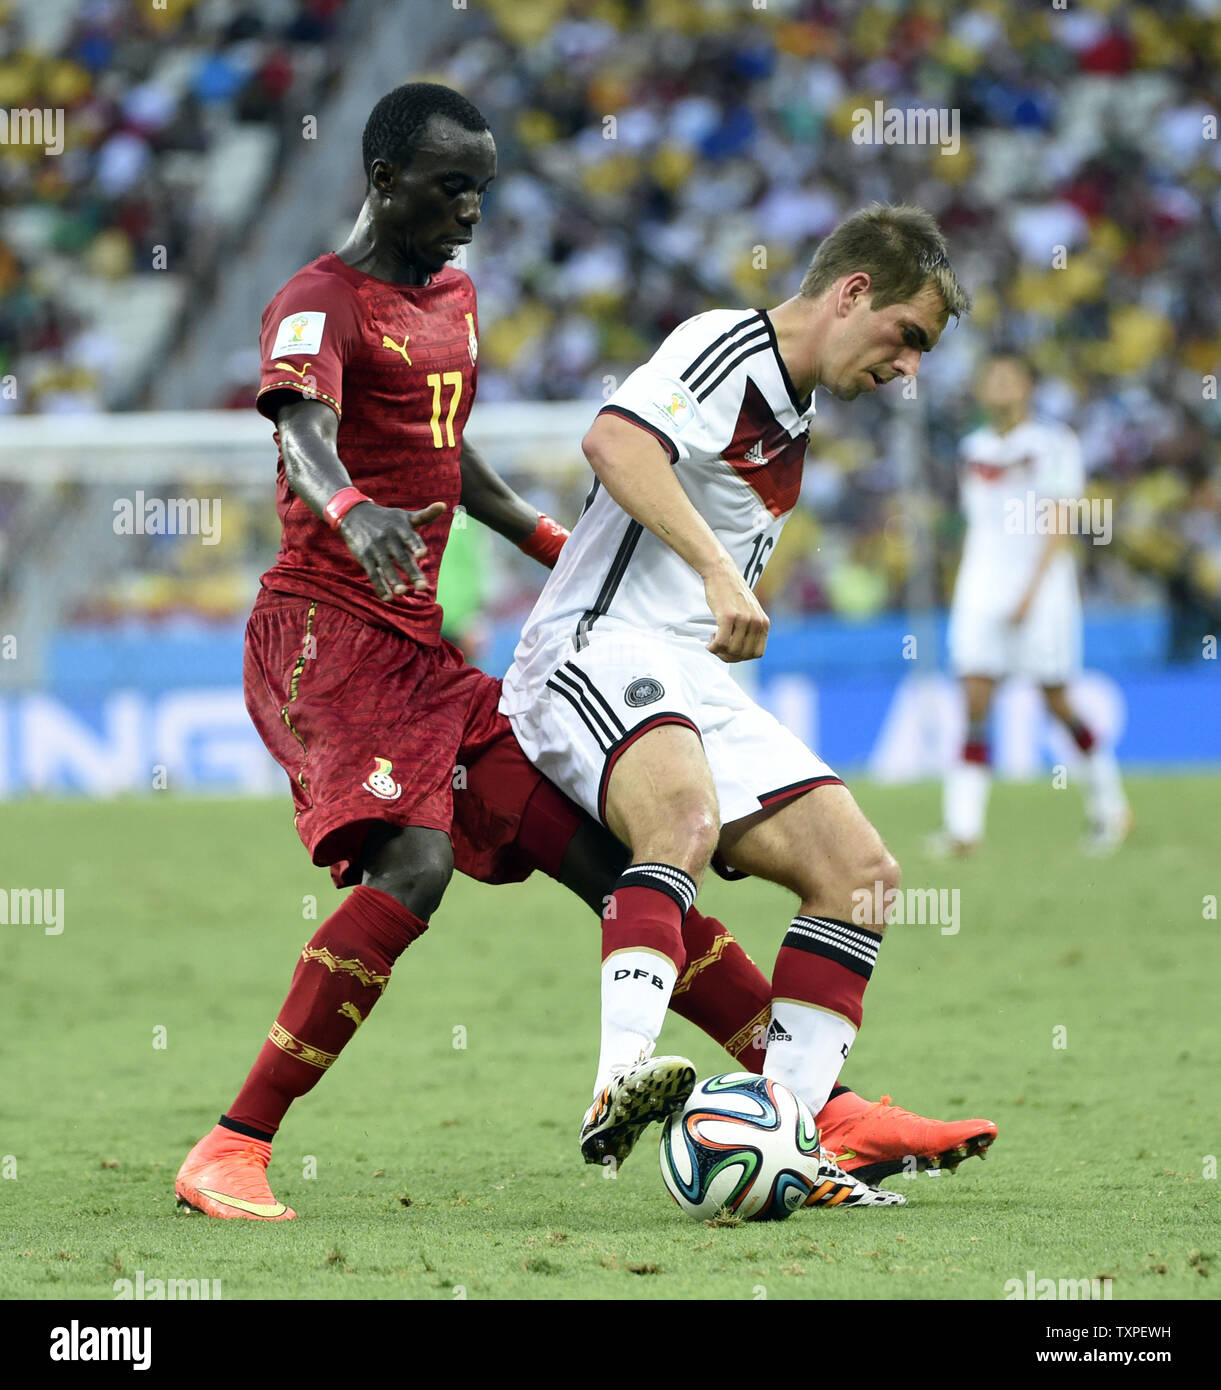 Philipp Lahm of Germany competes with Mohammed Rabiu (L) of Ghana during the 2014 FIFA World Cup Group G match at the Estadio Castelao in Fortaleza, Brazil on June 21, 2014. UPI/Chris Brunskill Stock Photo